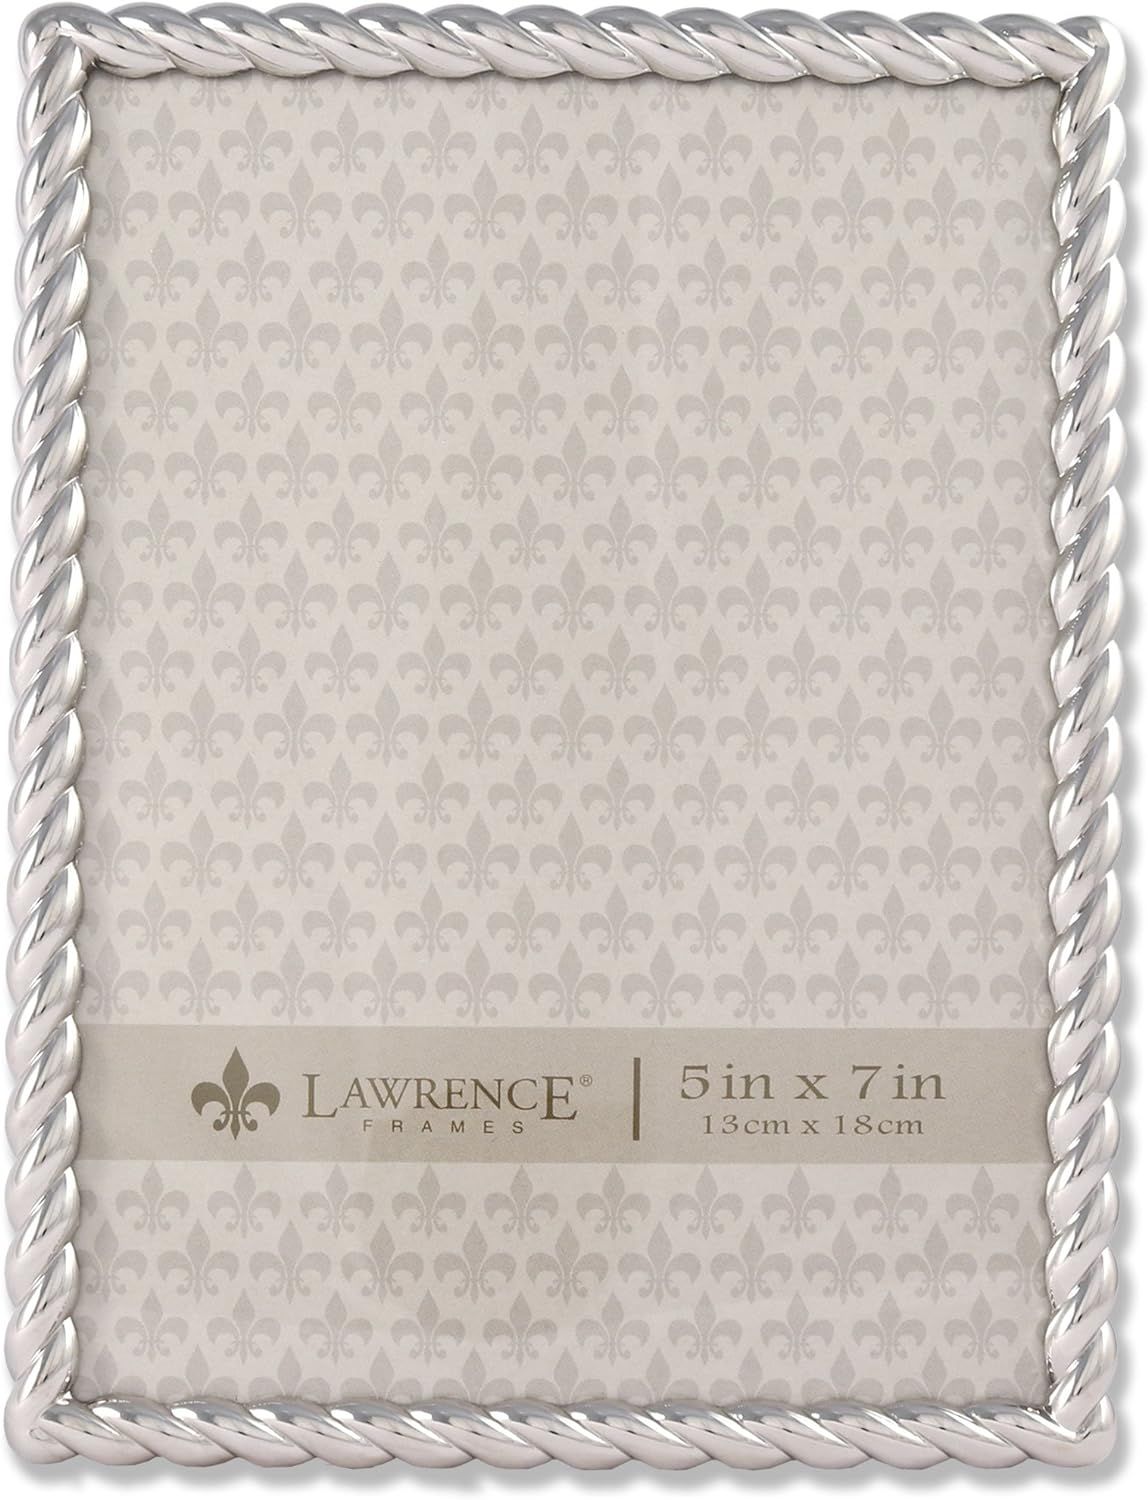 Lawrence Frames Rope Design Metal Frame, 5x7, Silver | Amazon (US)